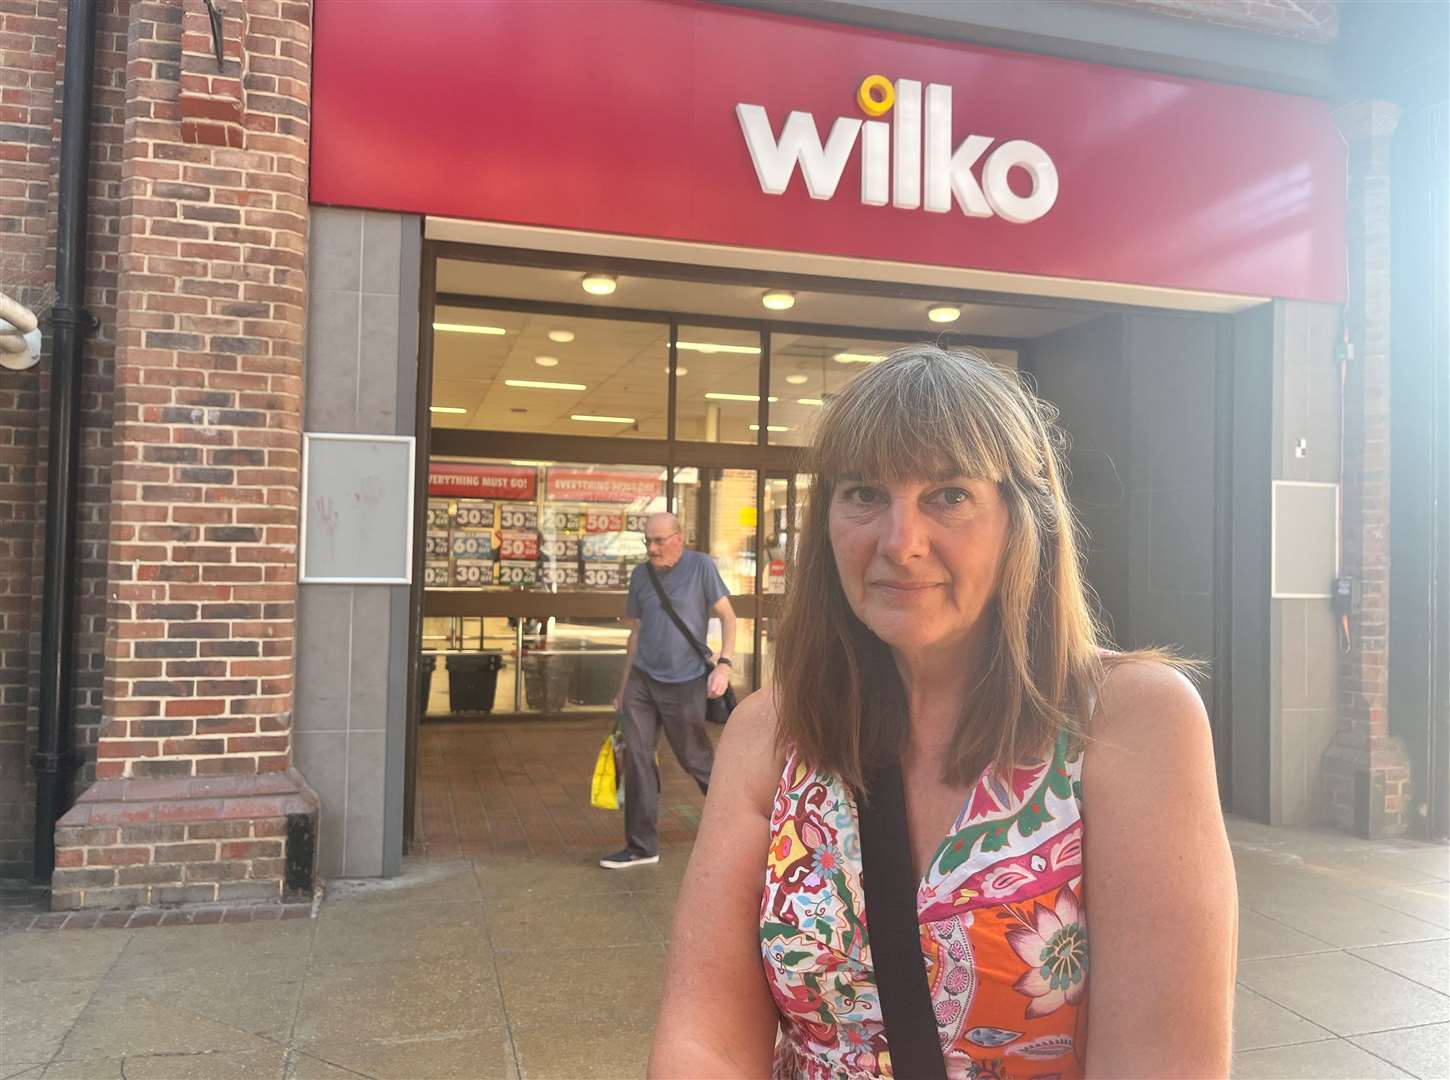 Julie Halliday says she is “gutted” Wilko is closing in Ashford